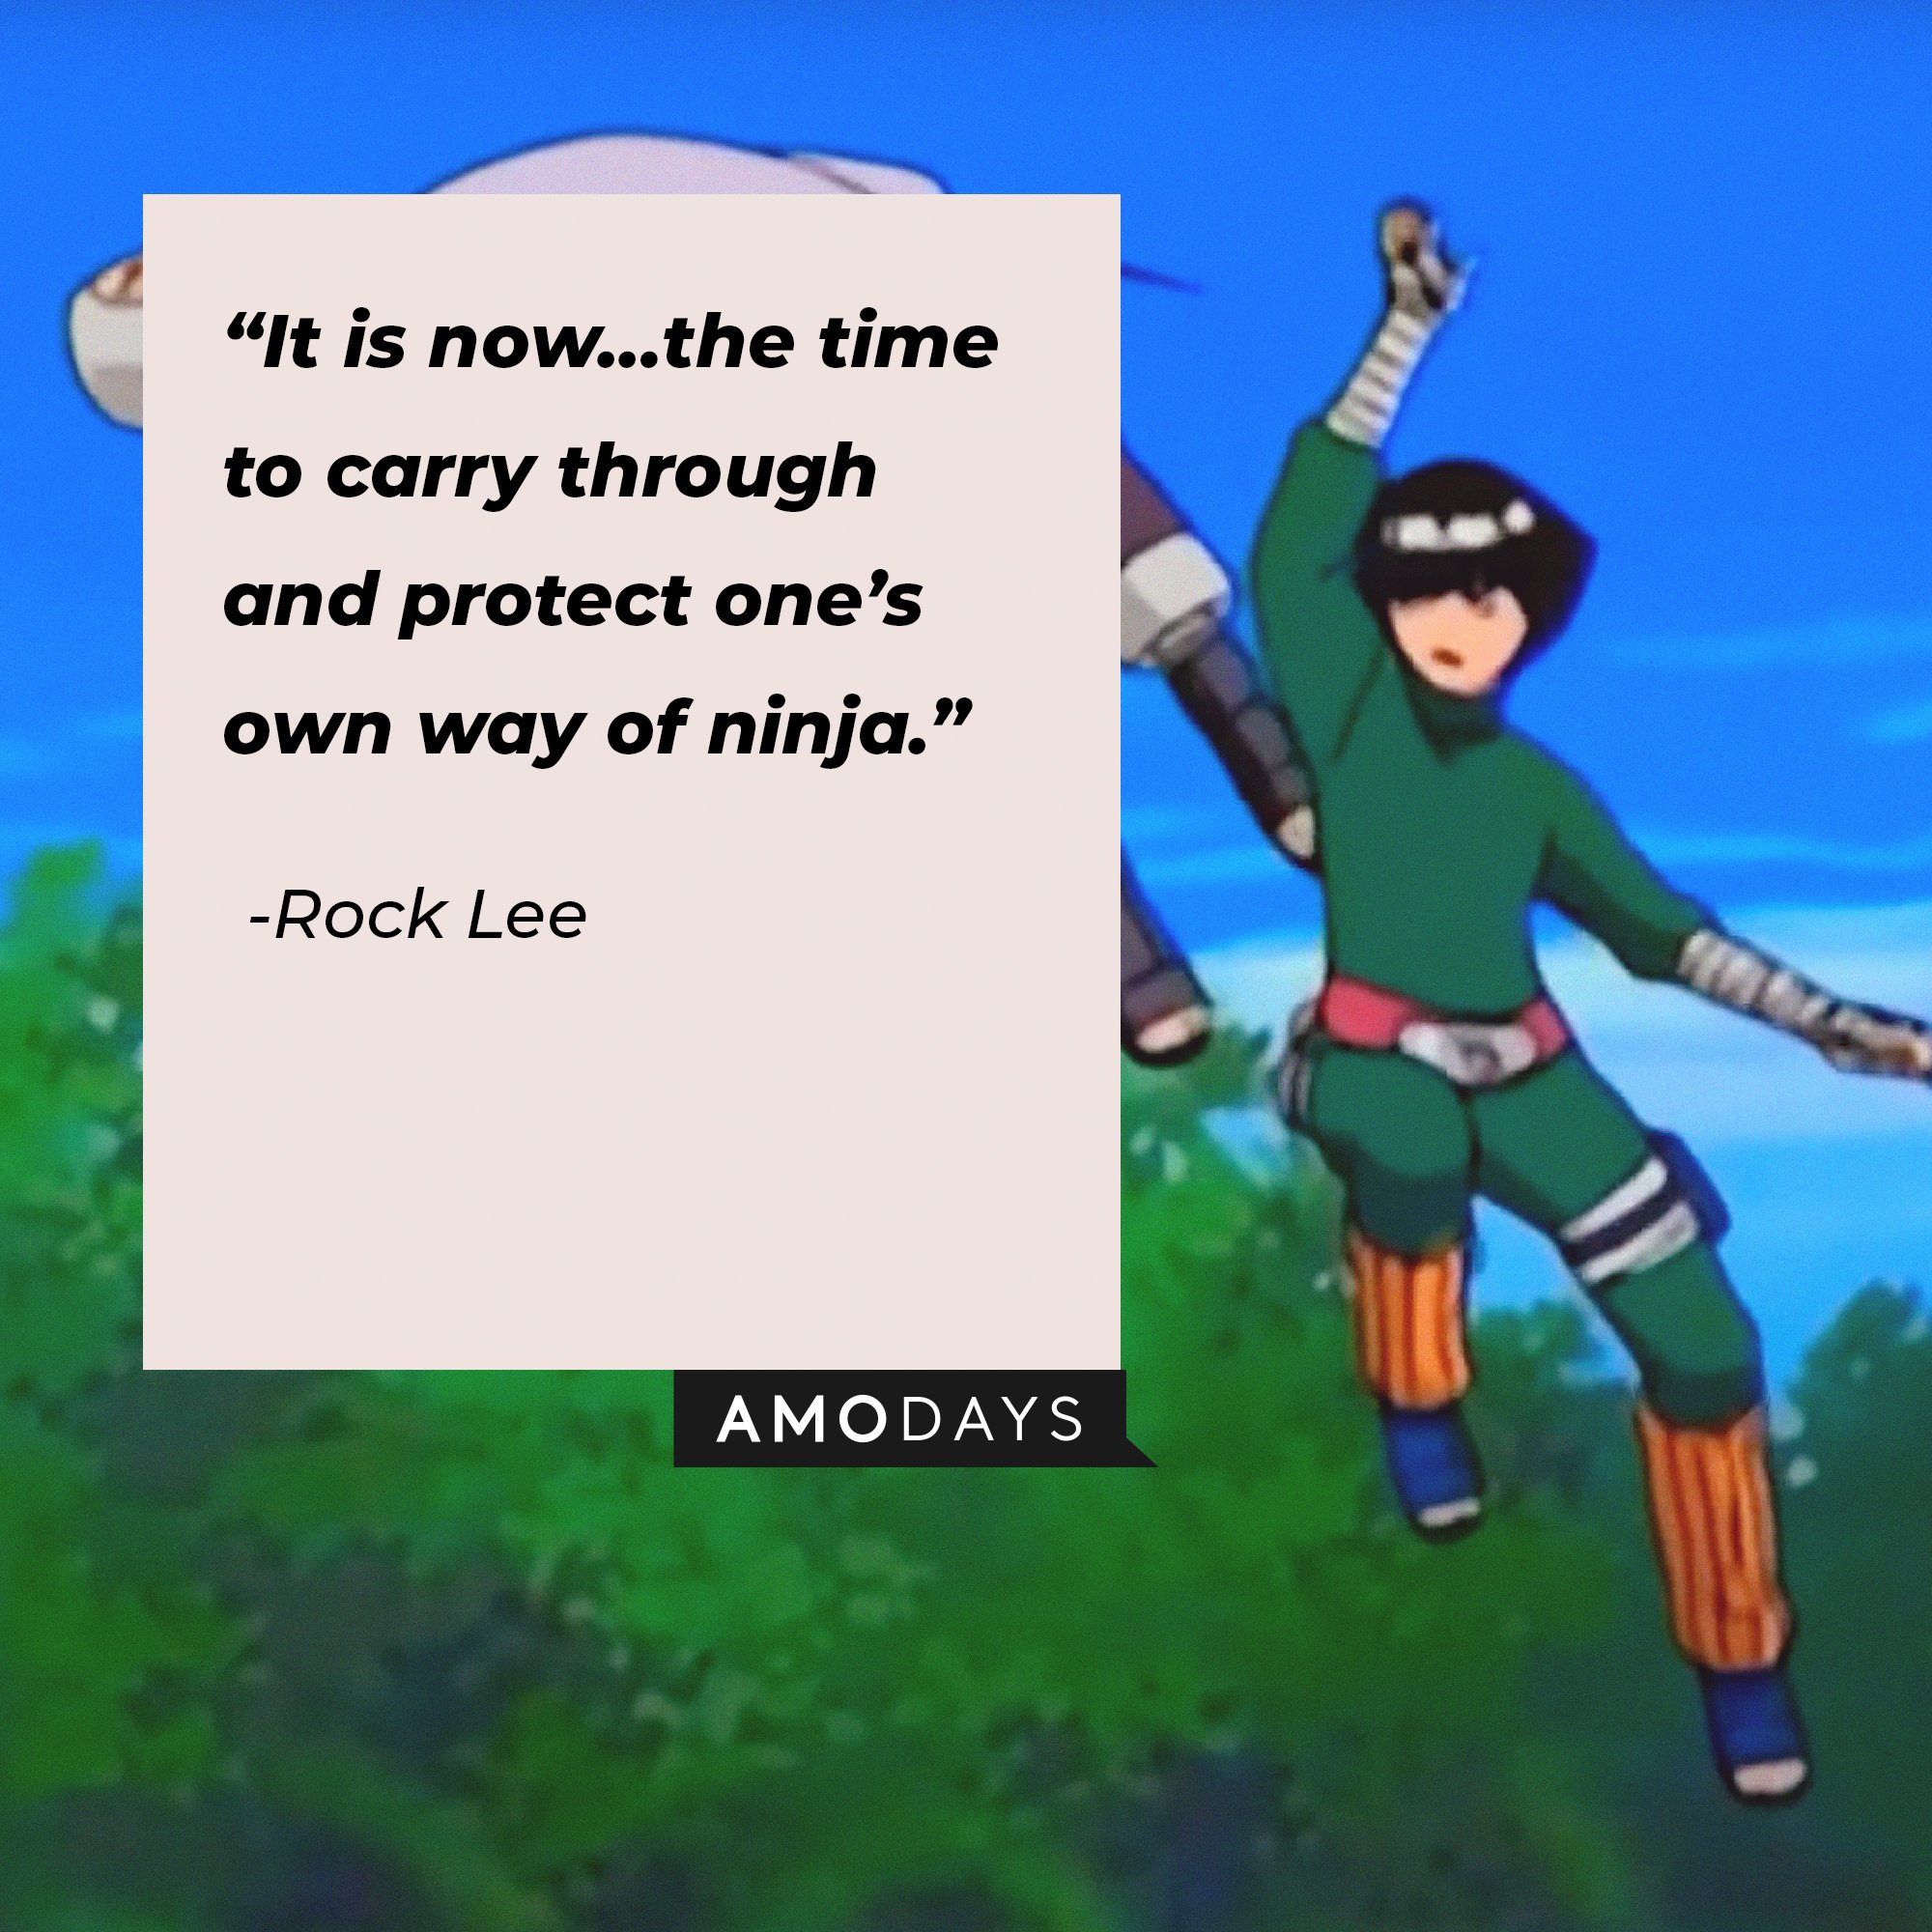 Rock Lee's quote: "It is now…the time to carry through and protect one’s own way of ninja."  | Image: AmoDays